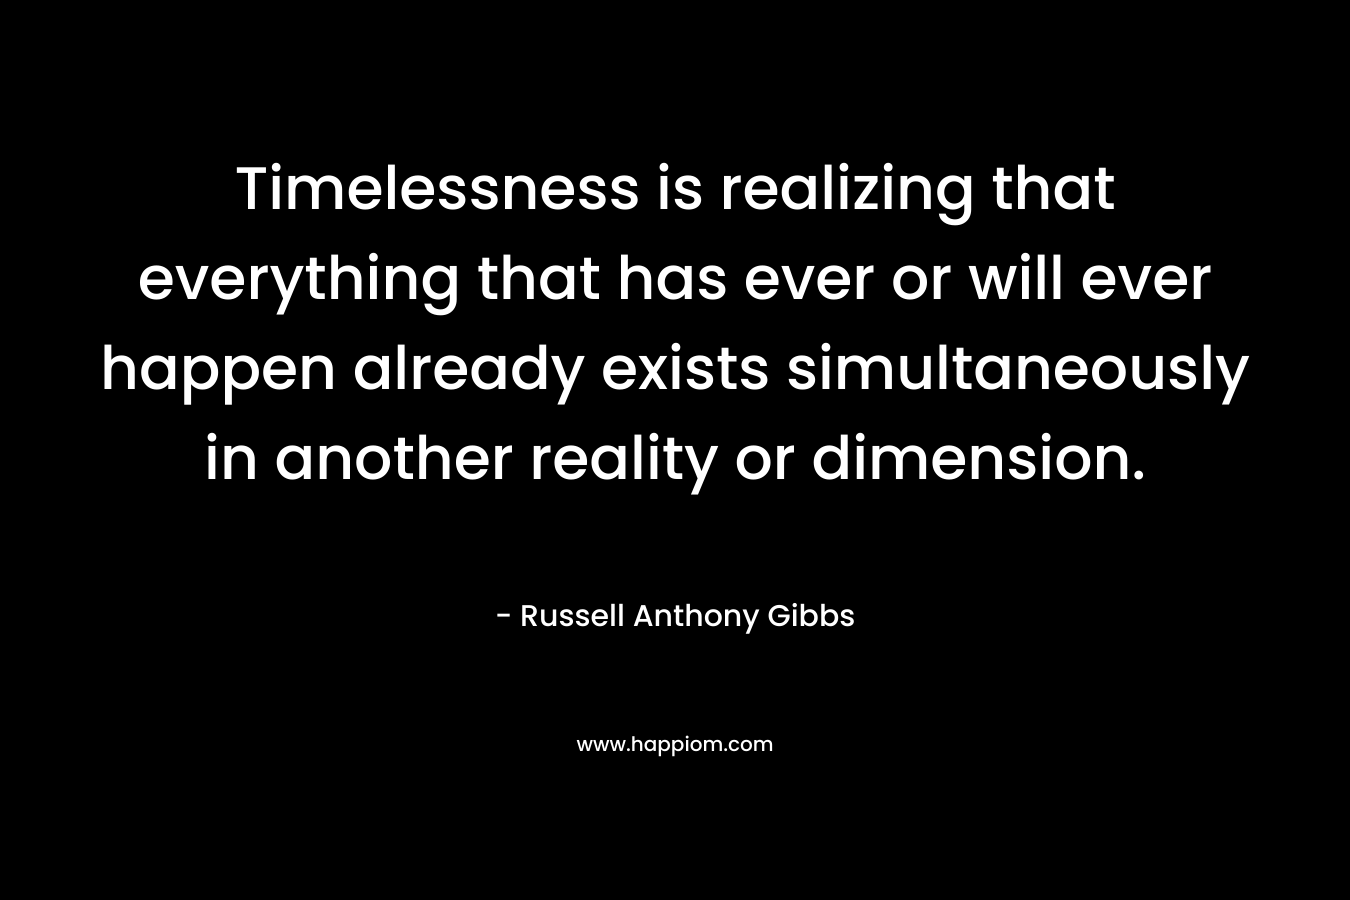 Timelessness is realizing that everything that has ever or will ever happen already exists simultaneously in another reality or dimension.